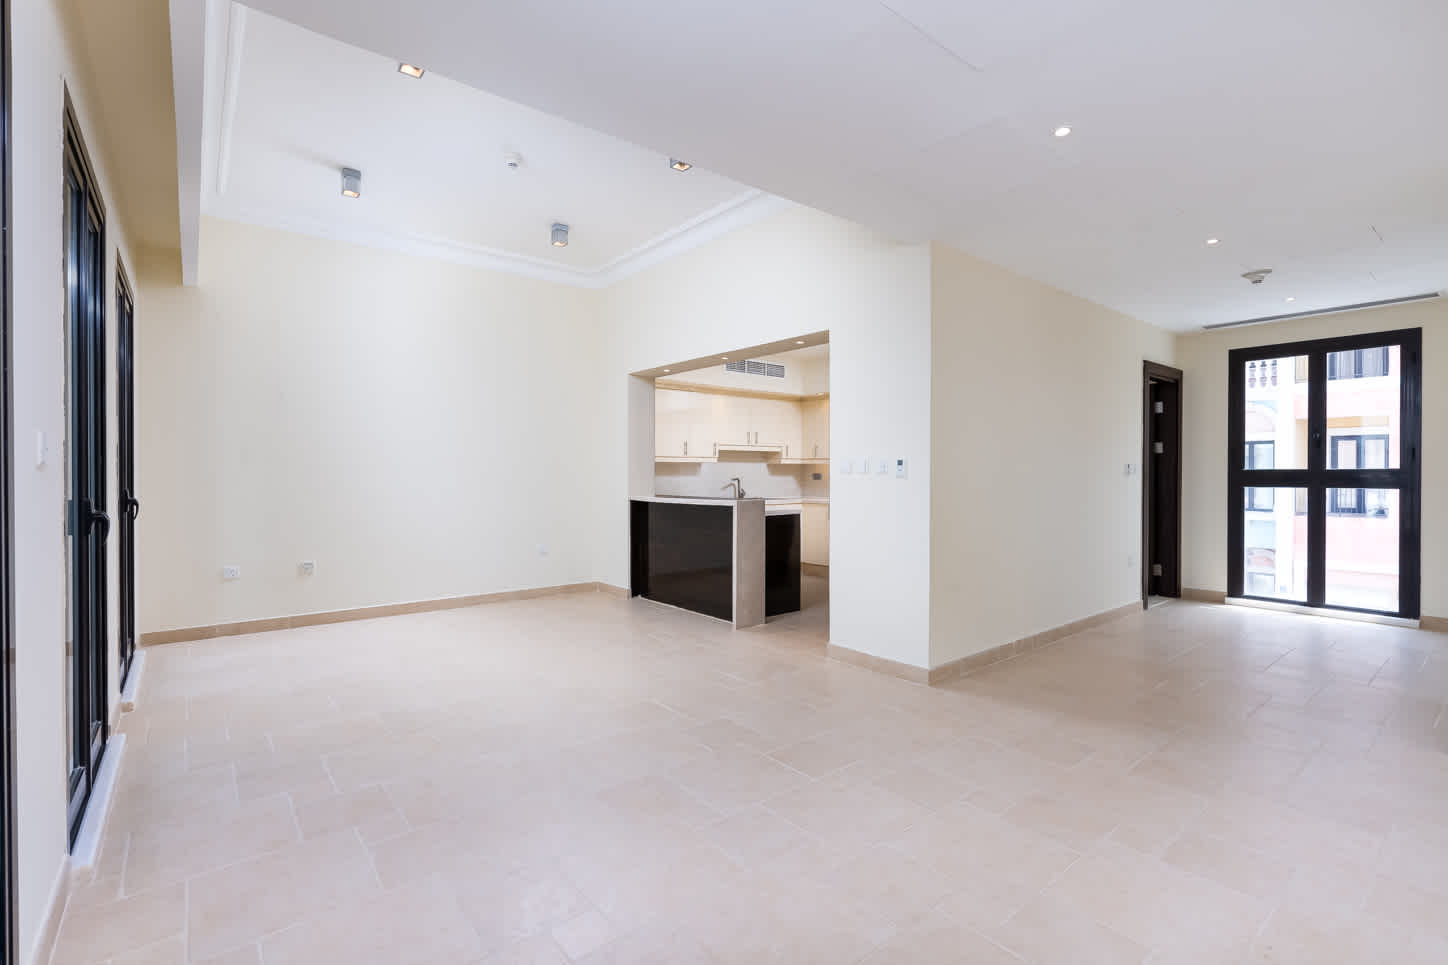 25 Spaces Real Estate - Qanat Quartier - Properties for Rent - 15th of MAY 2022 (ref THS2525)6